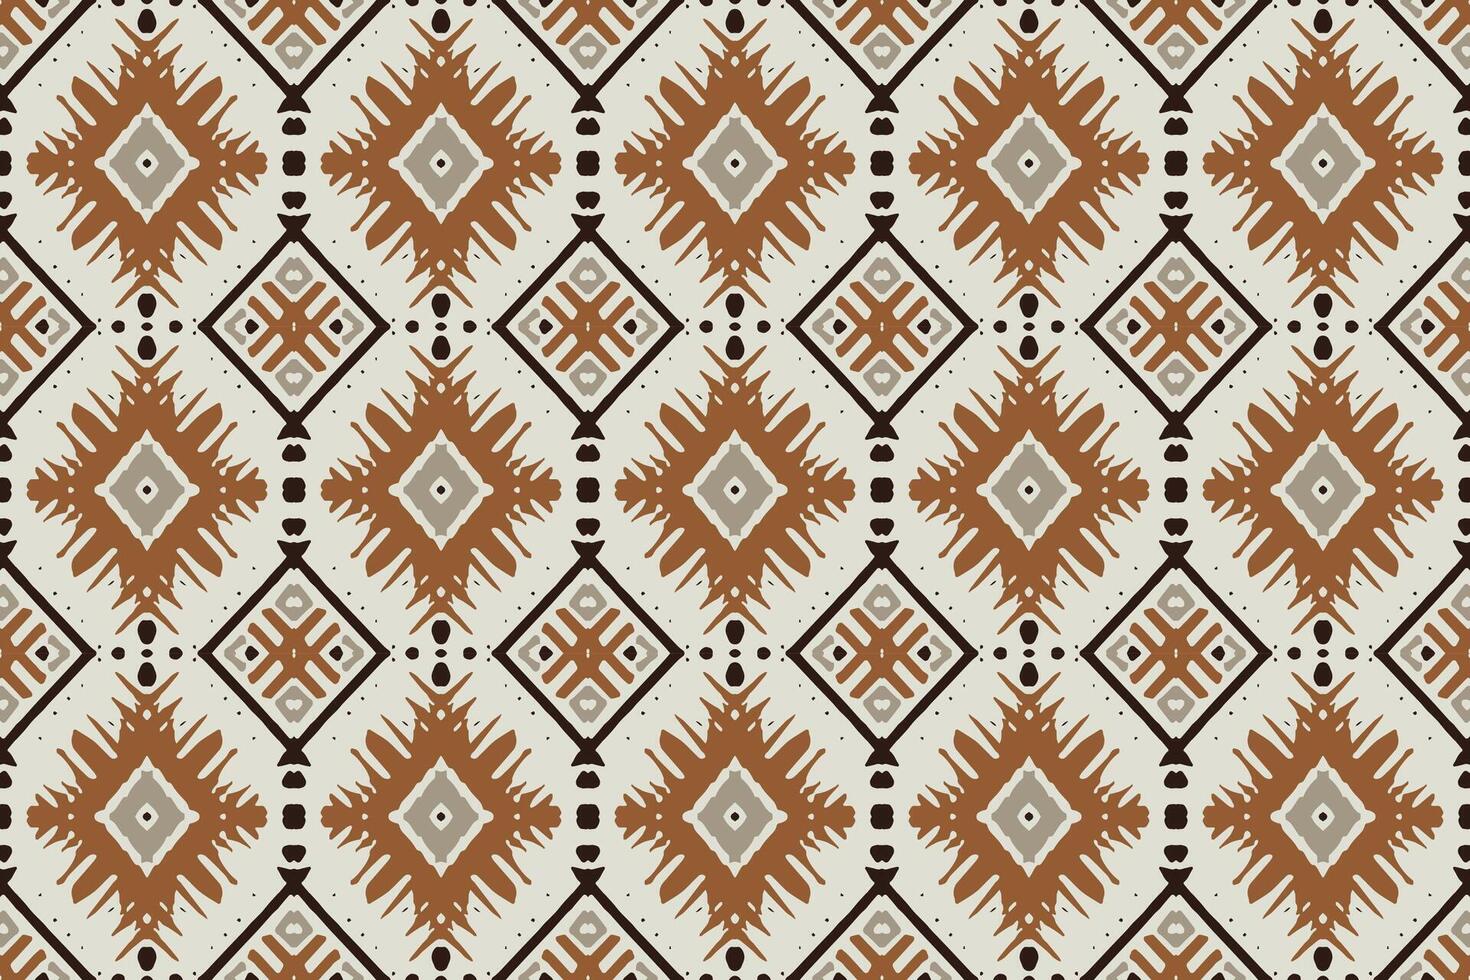 Geometric ethnic flower pattern for background,fabric,wrapping,clothing,wallpaper,Batik,carpet,embroidery style vector